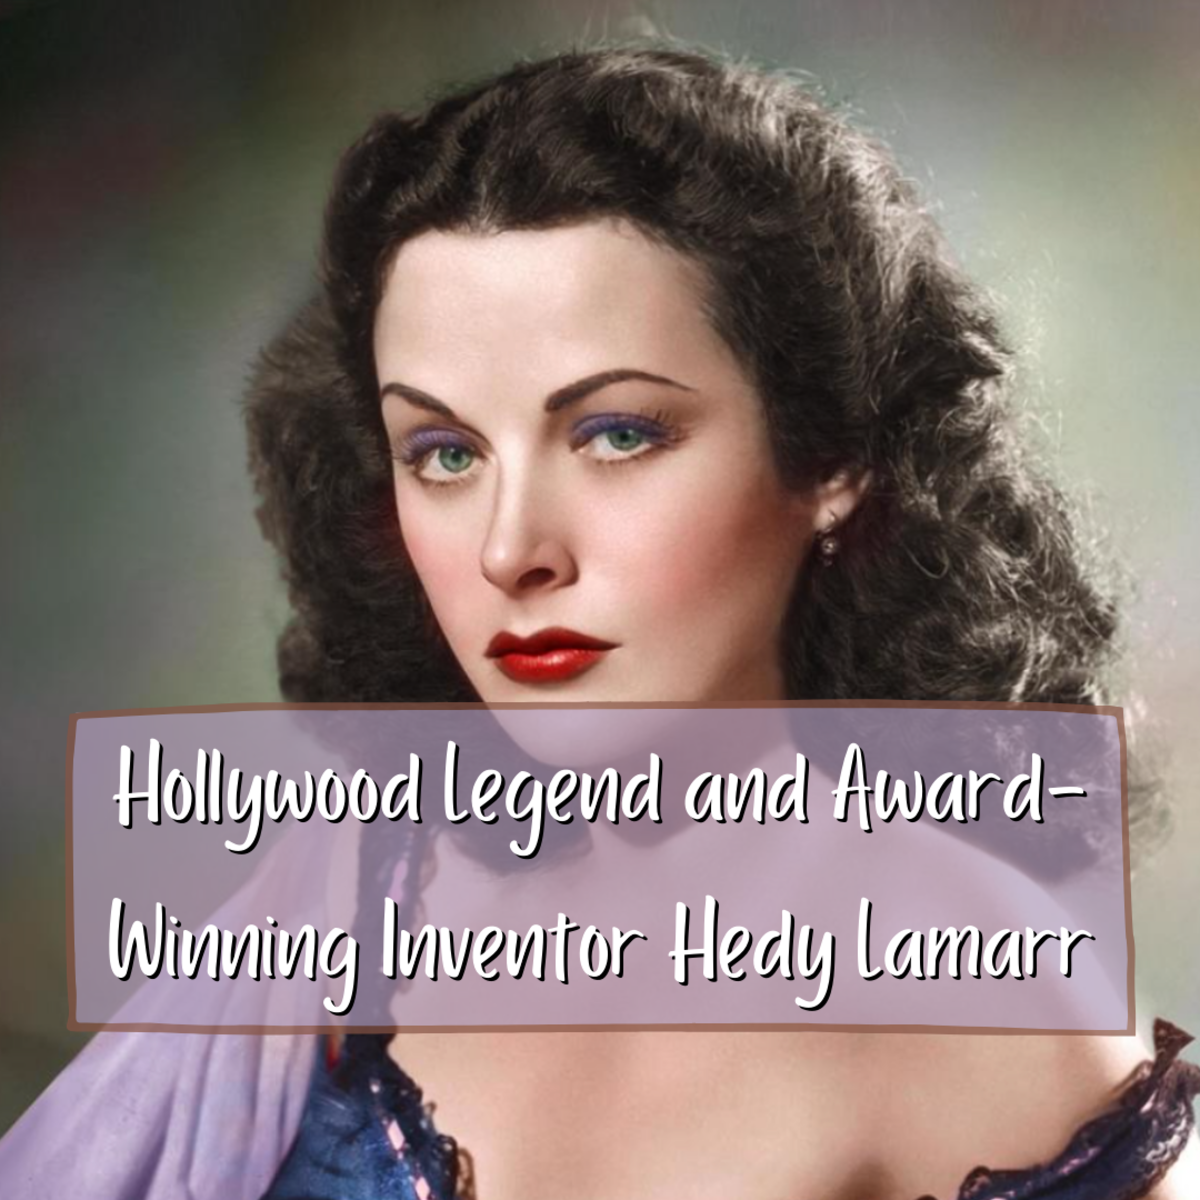 Read on to learn all about Hedy Lamarr, Hollywood legend and important inventor. Her co-invention of a method for spreading spectrum communications earned her the nickname of “the mother of Wi-Fi."